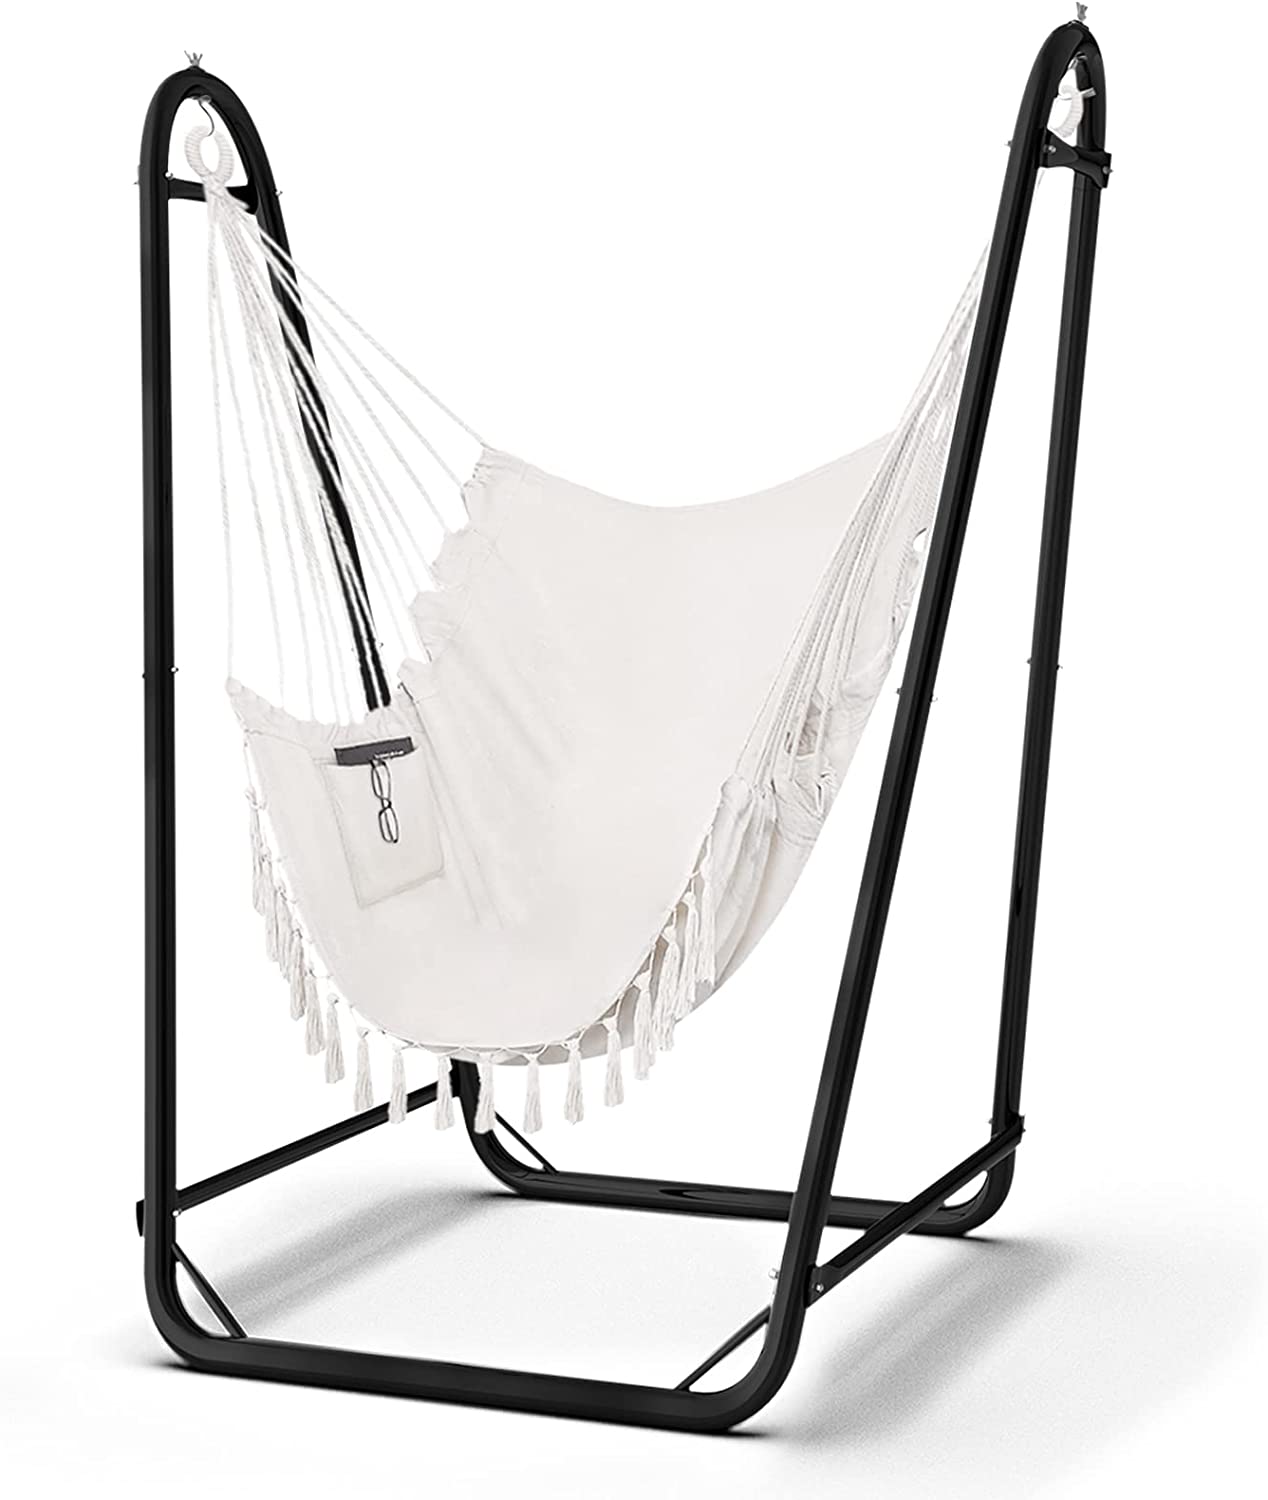 Hammock Chair with Stand,Heavy-Duty Hanging Chair with Stand, for Indoor Outdoor,Sturdy Swing Chair with Stand Max Load 350 pounds… - Airbnb Ambassador